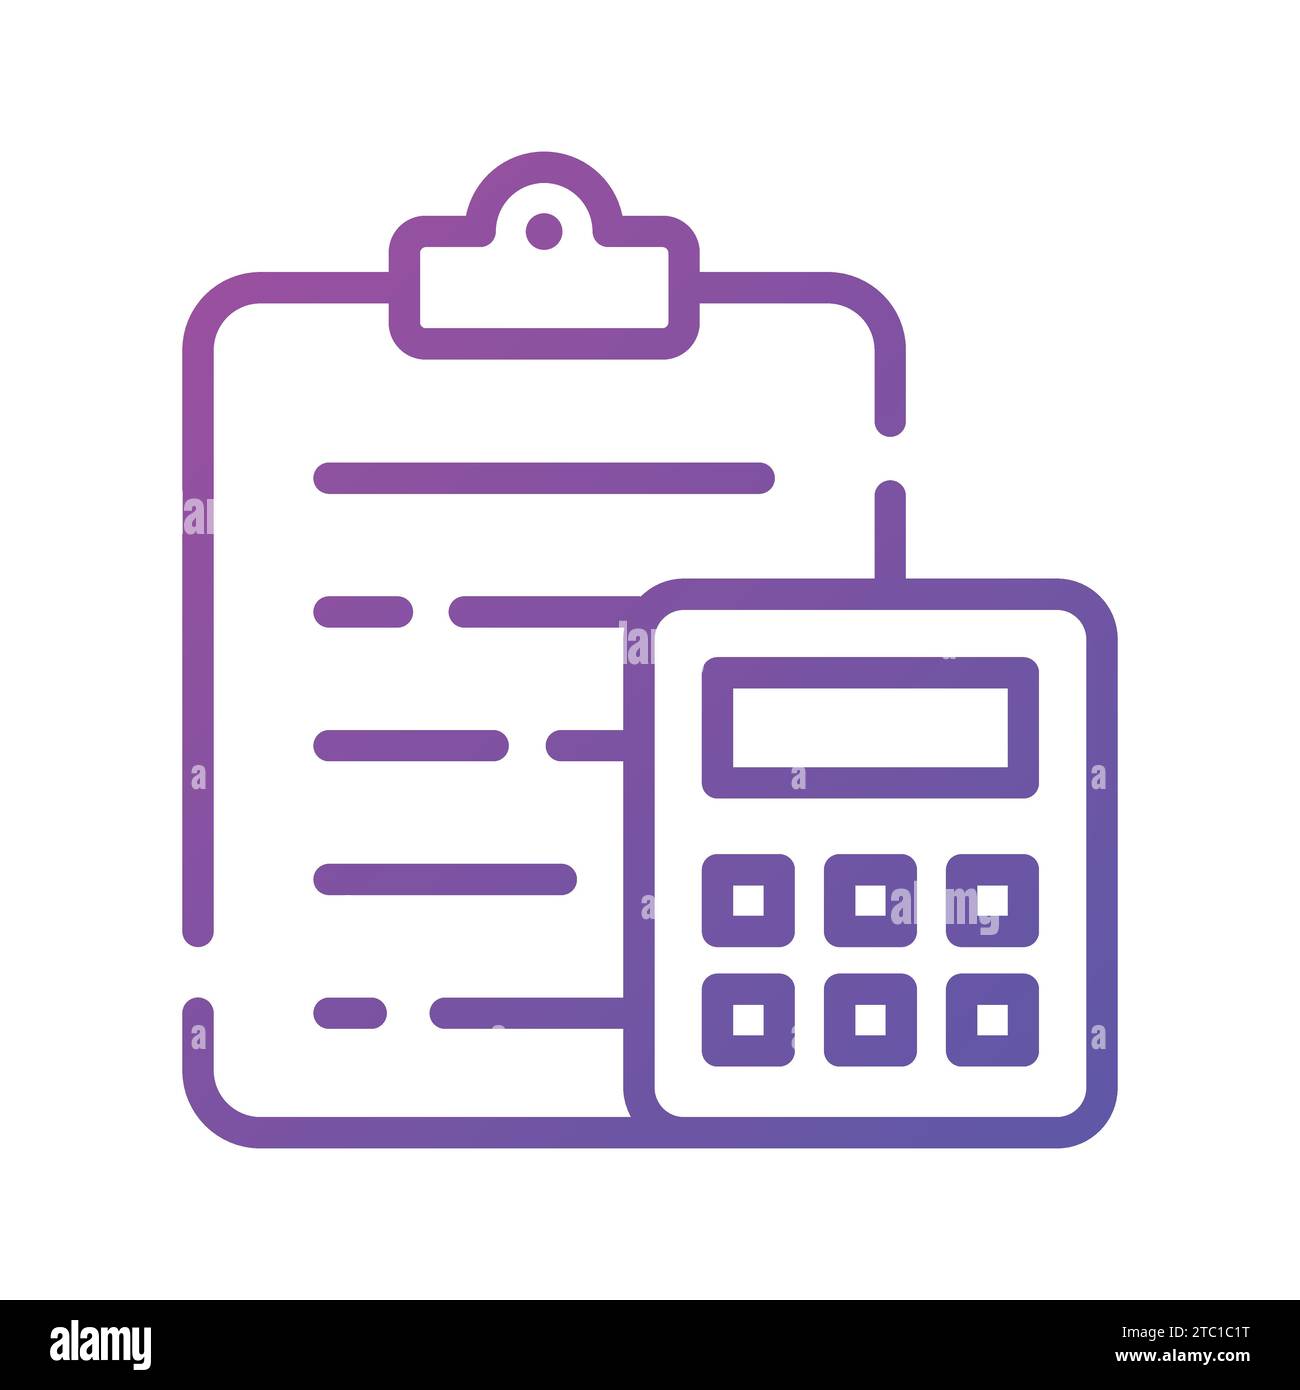 Financial plan icon in modern style, business accounting vector. Stock Vector